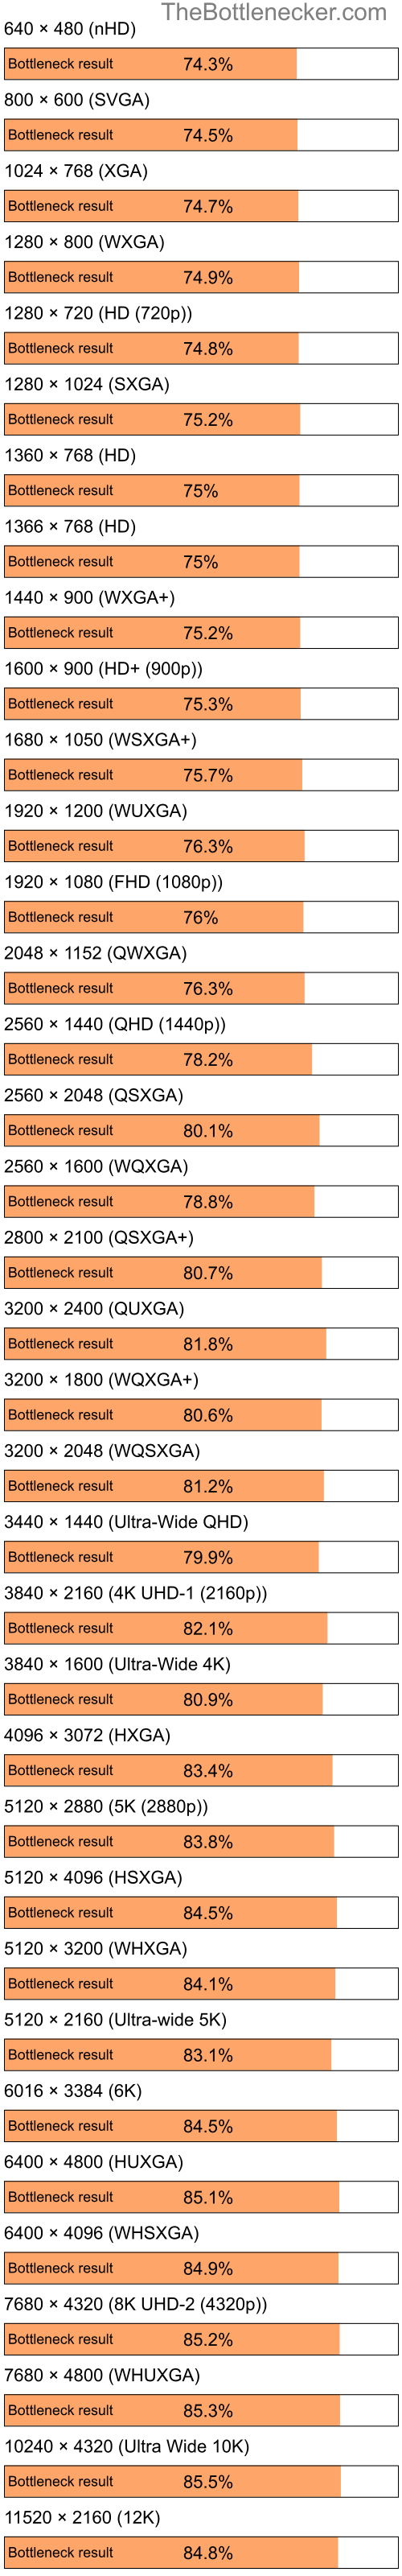 Bottleneck results by resolution for Intel Pentium 4 and AMD Mobility Radeon X1350 in General Tasks